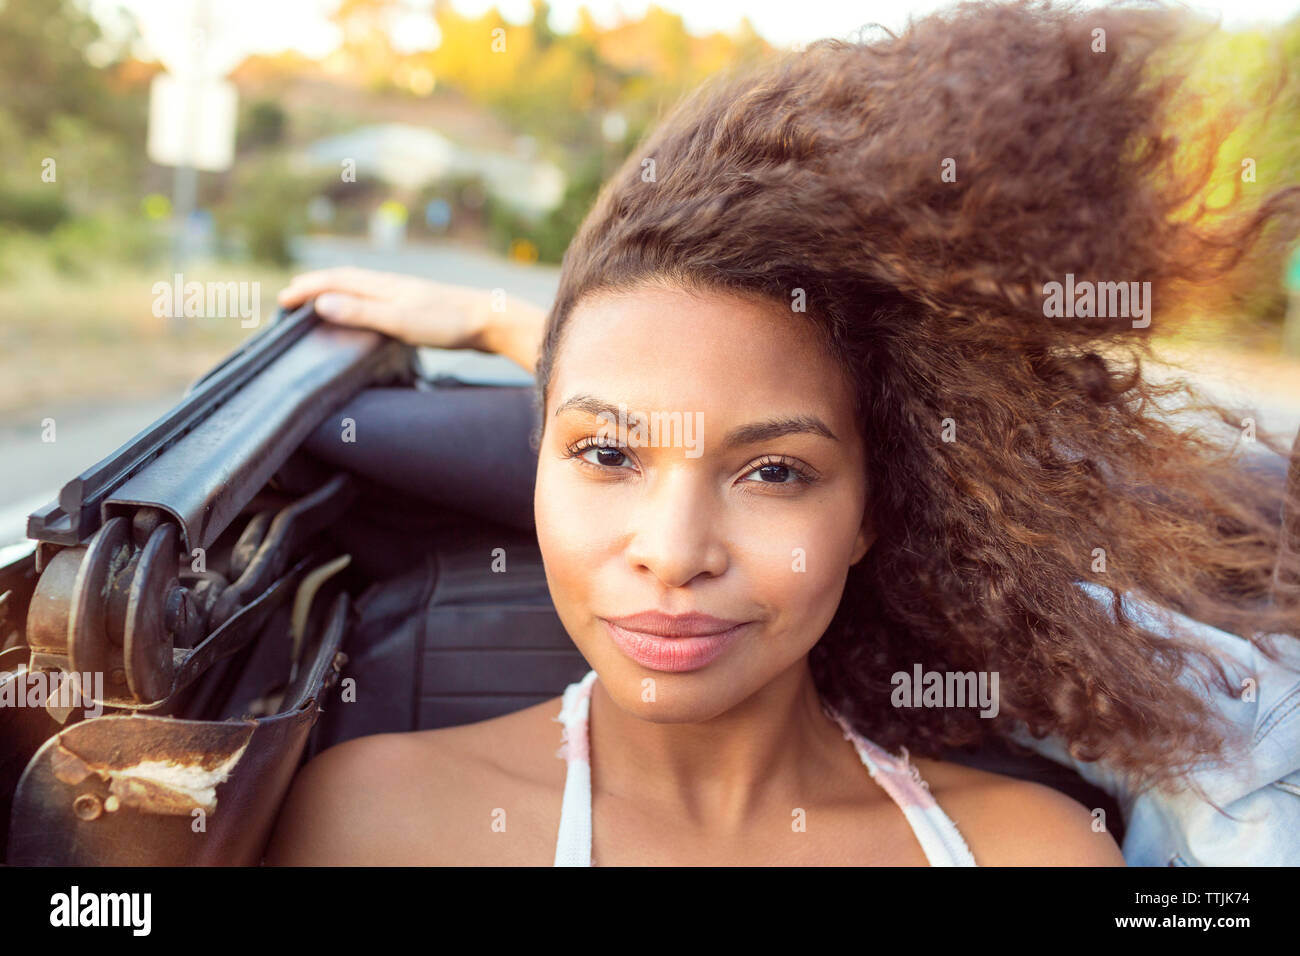 Portrait of smiling woman sitting in convertible car Banque D'Images